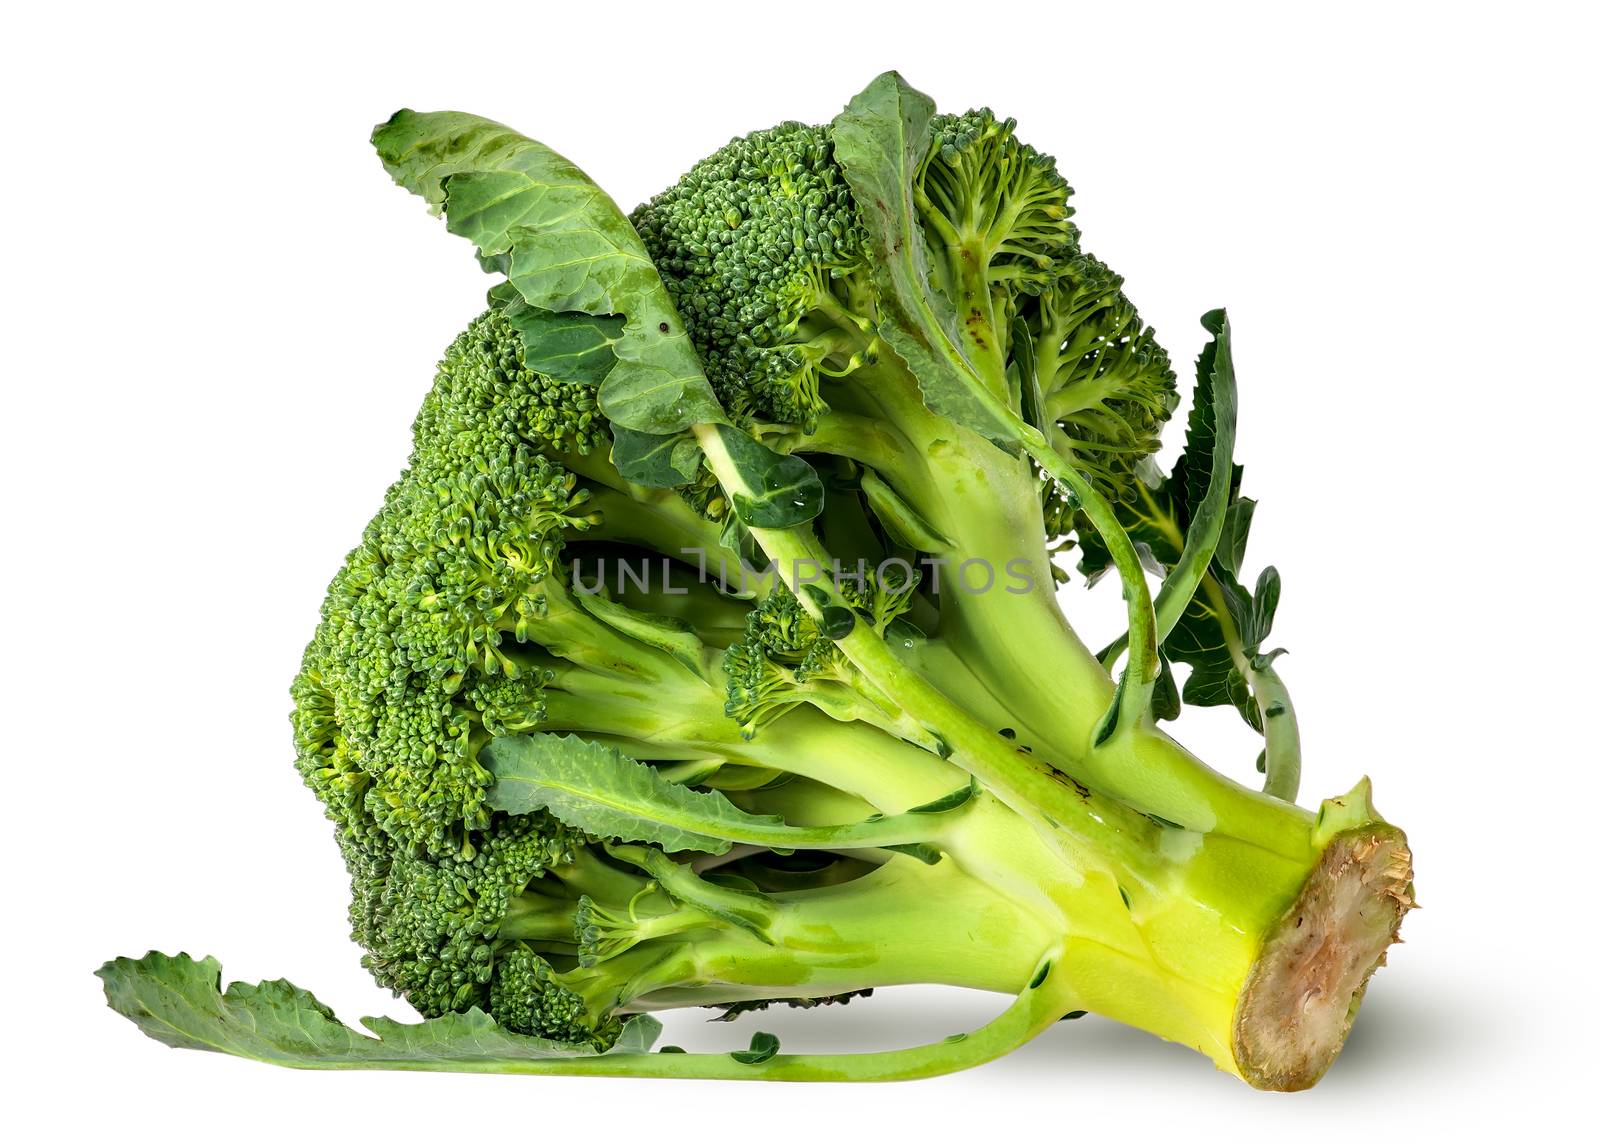 Big broccoli florets with leaves isolated on white background